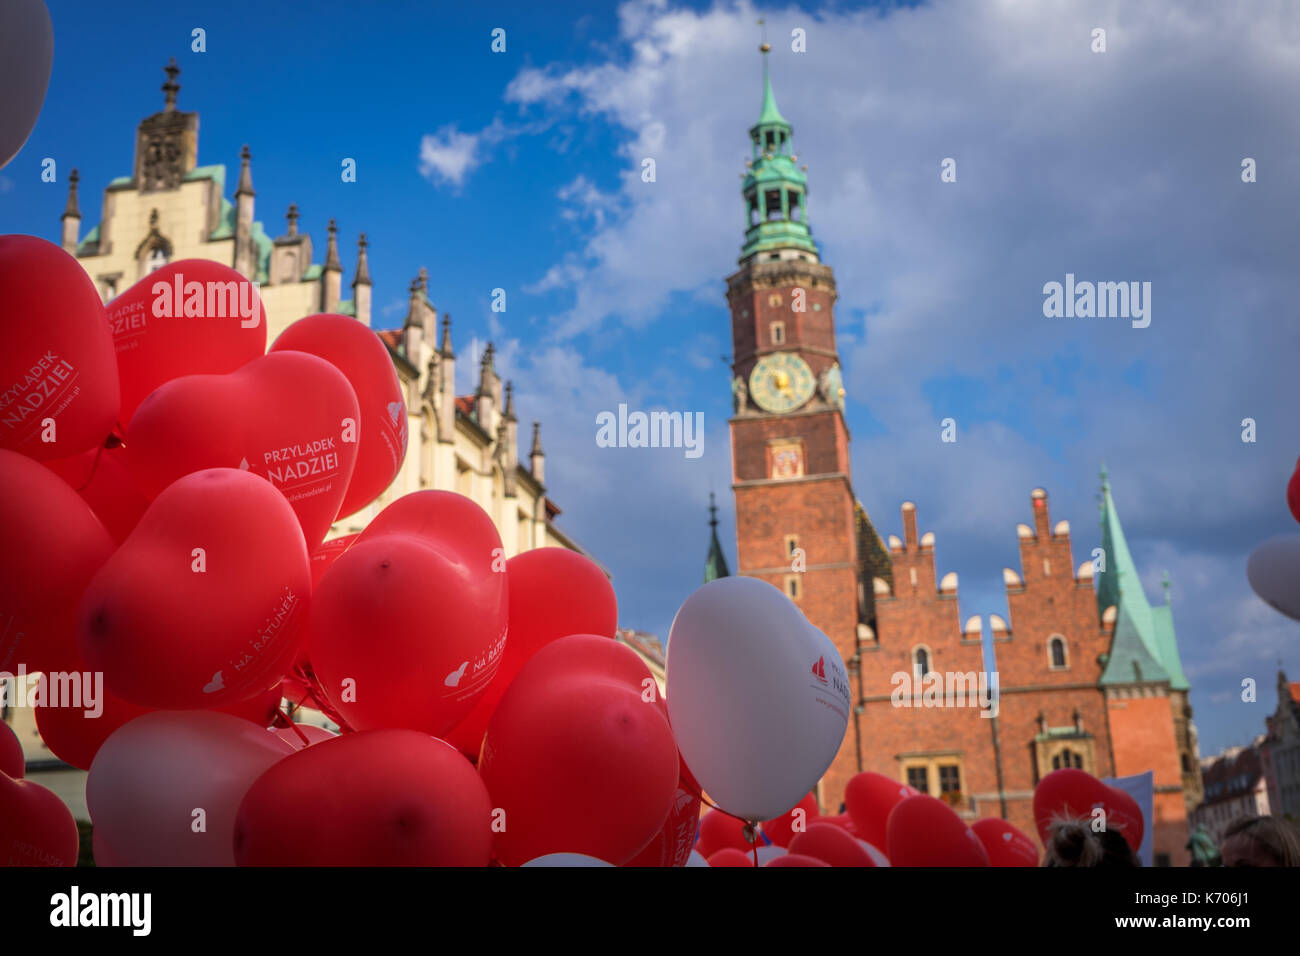 Balloons in red and white -  the Polish national colours with the Old Town Hall in the background, Wroclaw, Poland Stock Photo